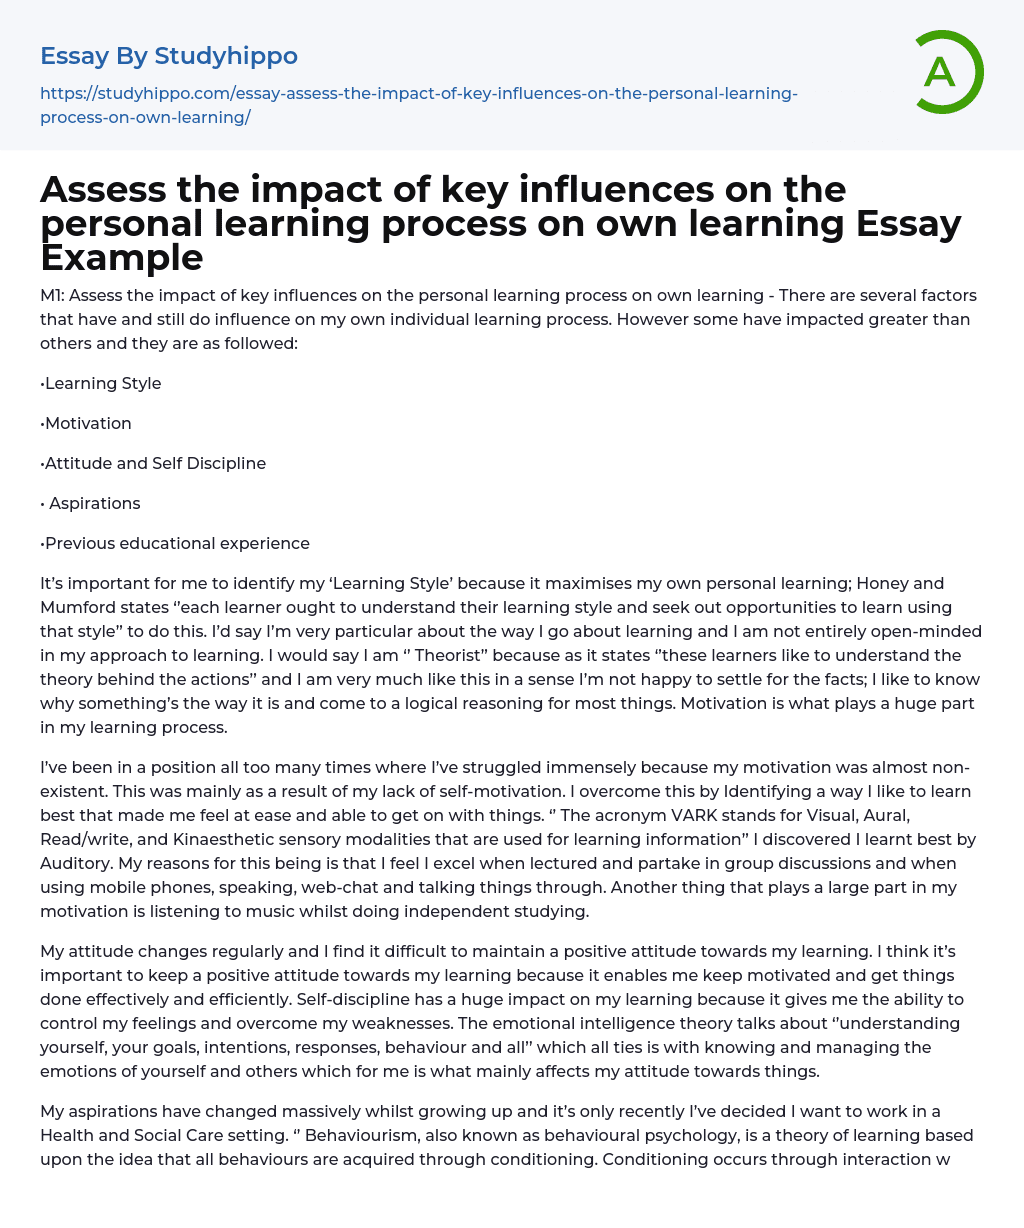 Assess the impact of key influences on the personal learning process on own learning Essay Example